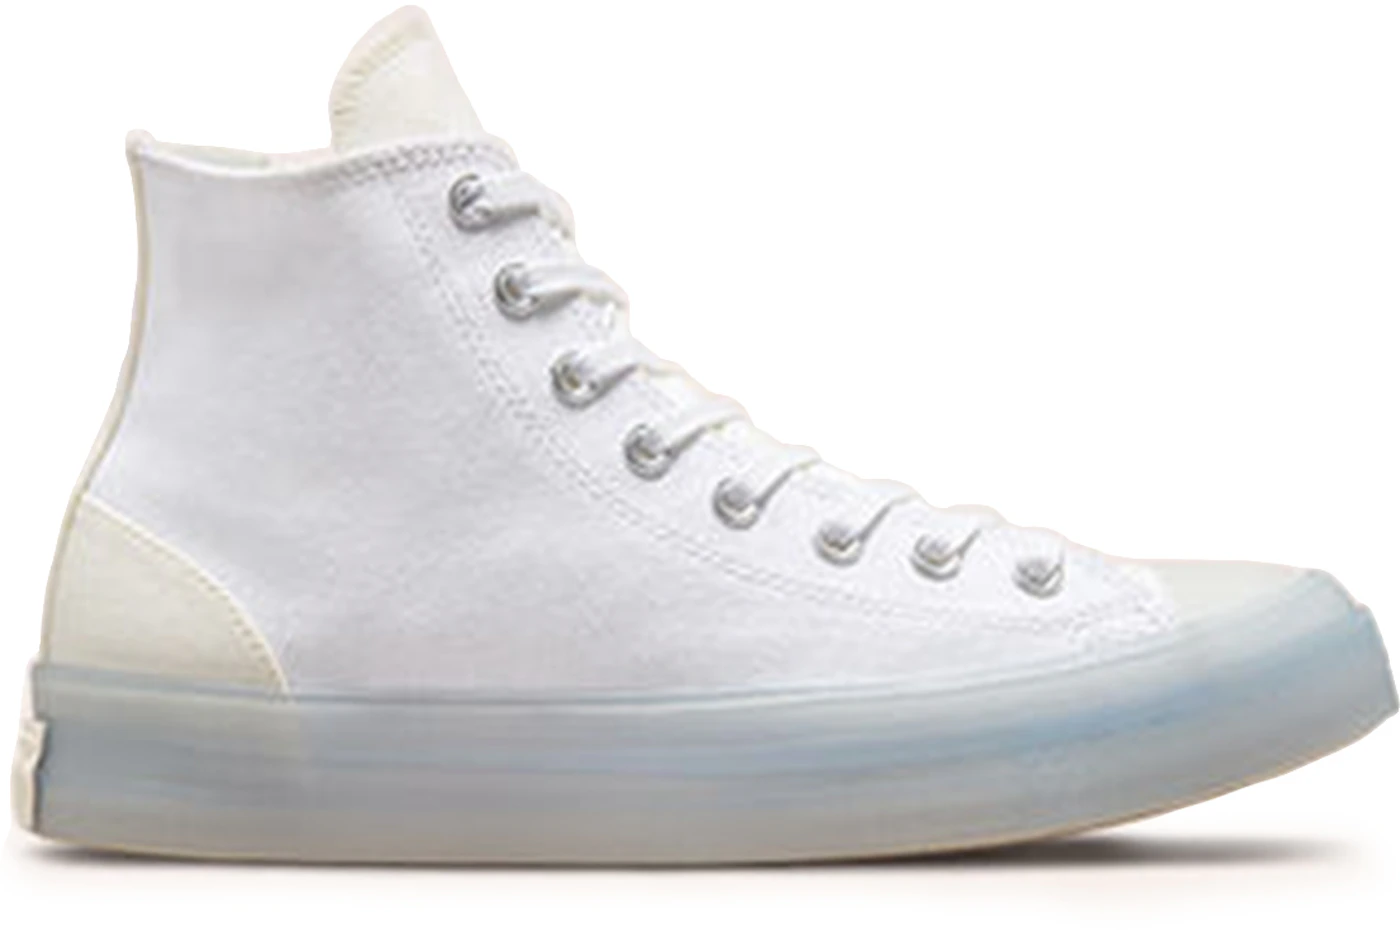 Converse Chuck Taylor All Star CX Unisex - Sneakers Converse - White - 172948C - Size